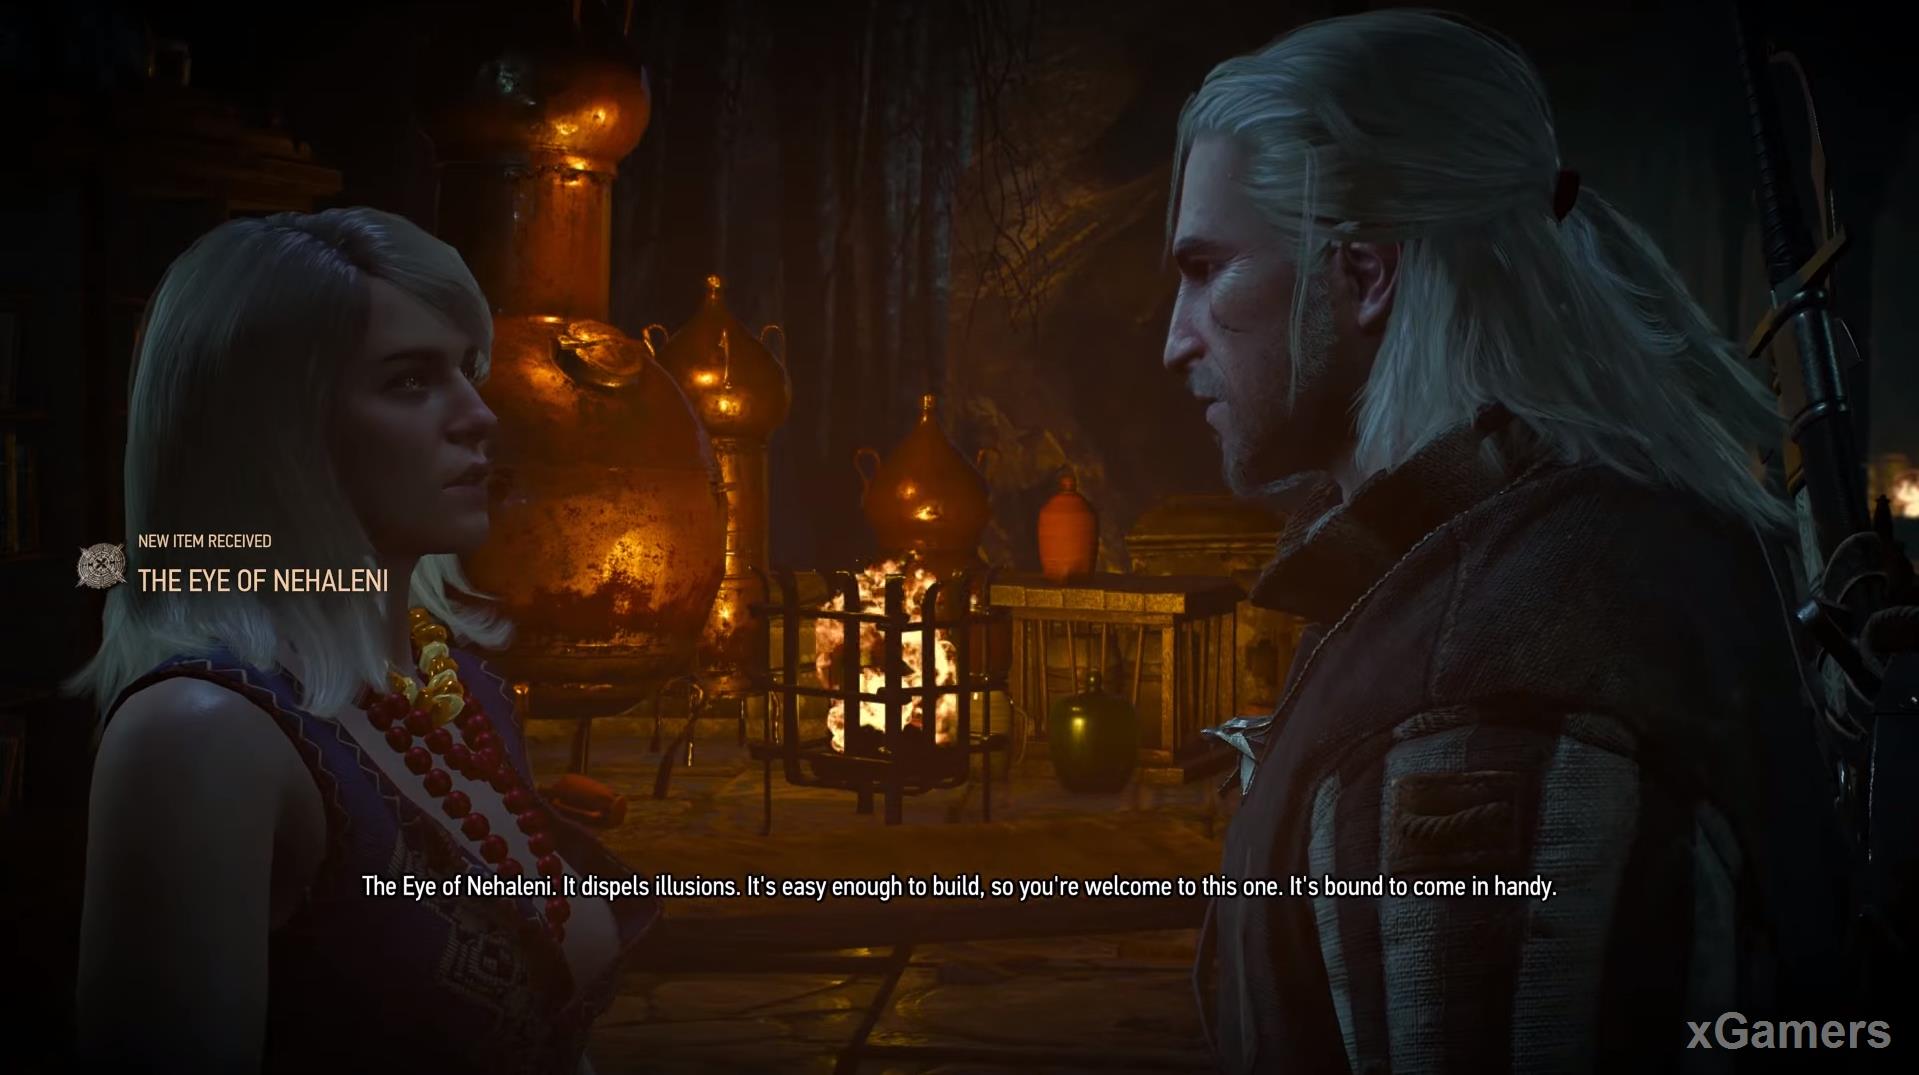 Keira Metz will give Geralt the Eye of Nehaleni, able to remove illusions